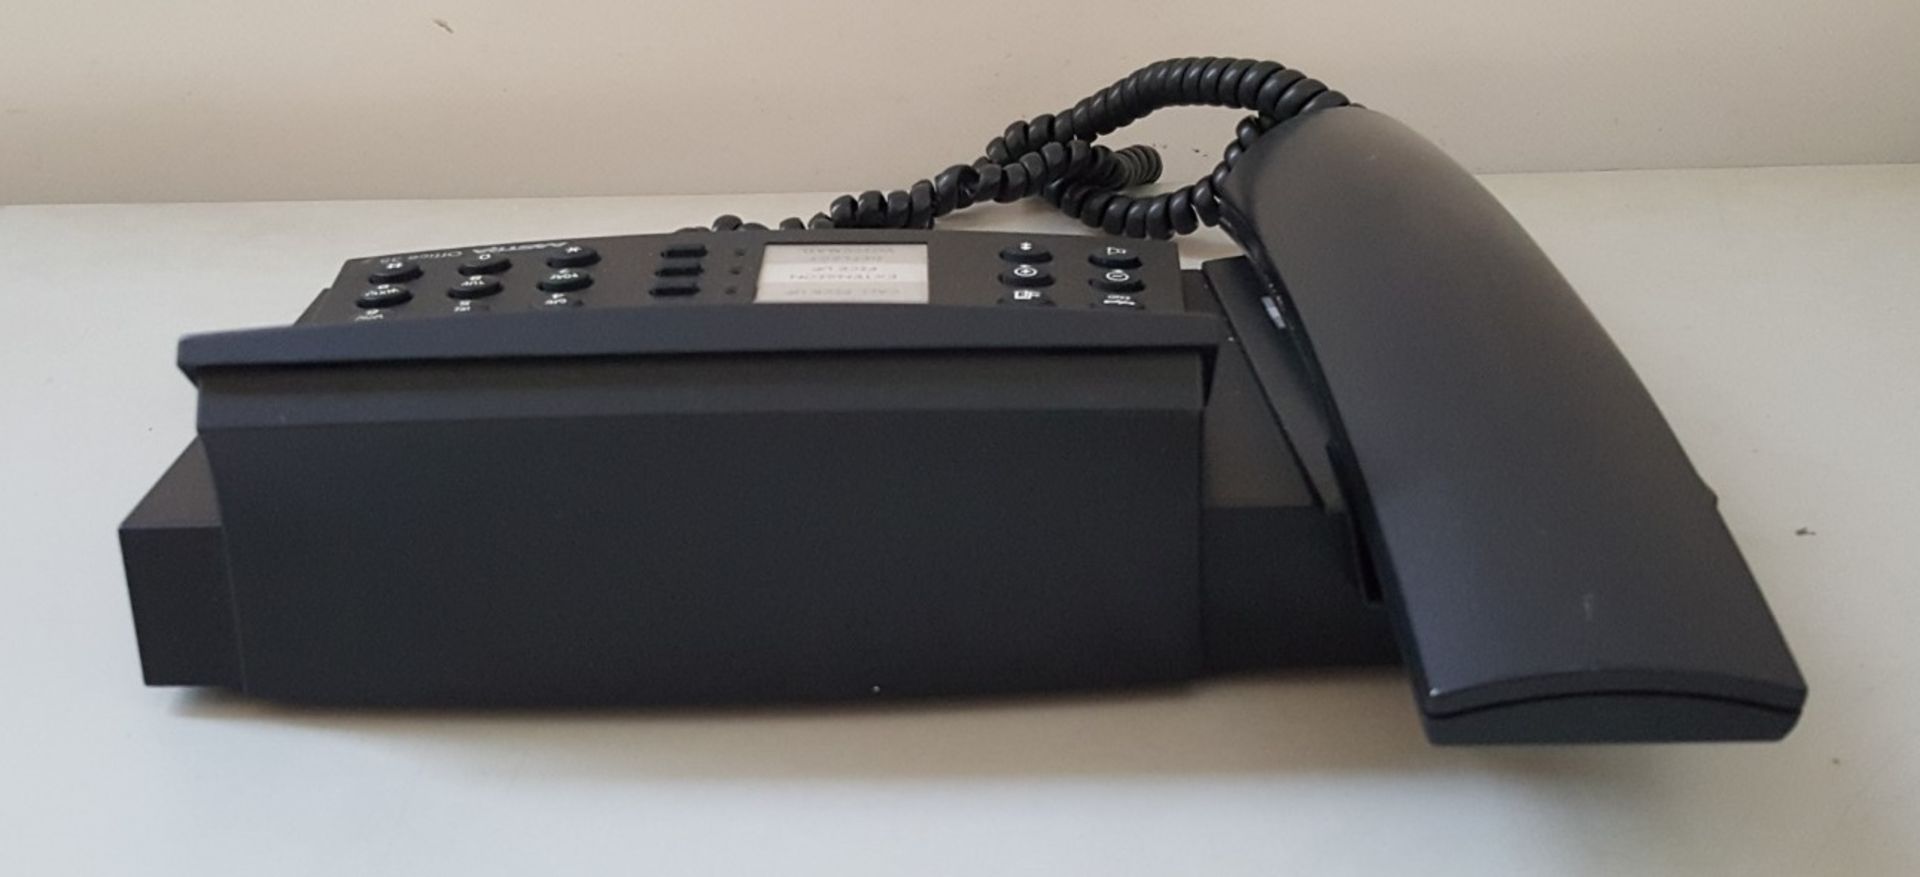 13 x Aastra Office 35 Digital Telephone Handsets Finished In Titanium Grey - Ref: LD375 - CL409 - - Image 5 of 6